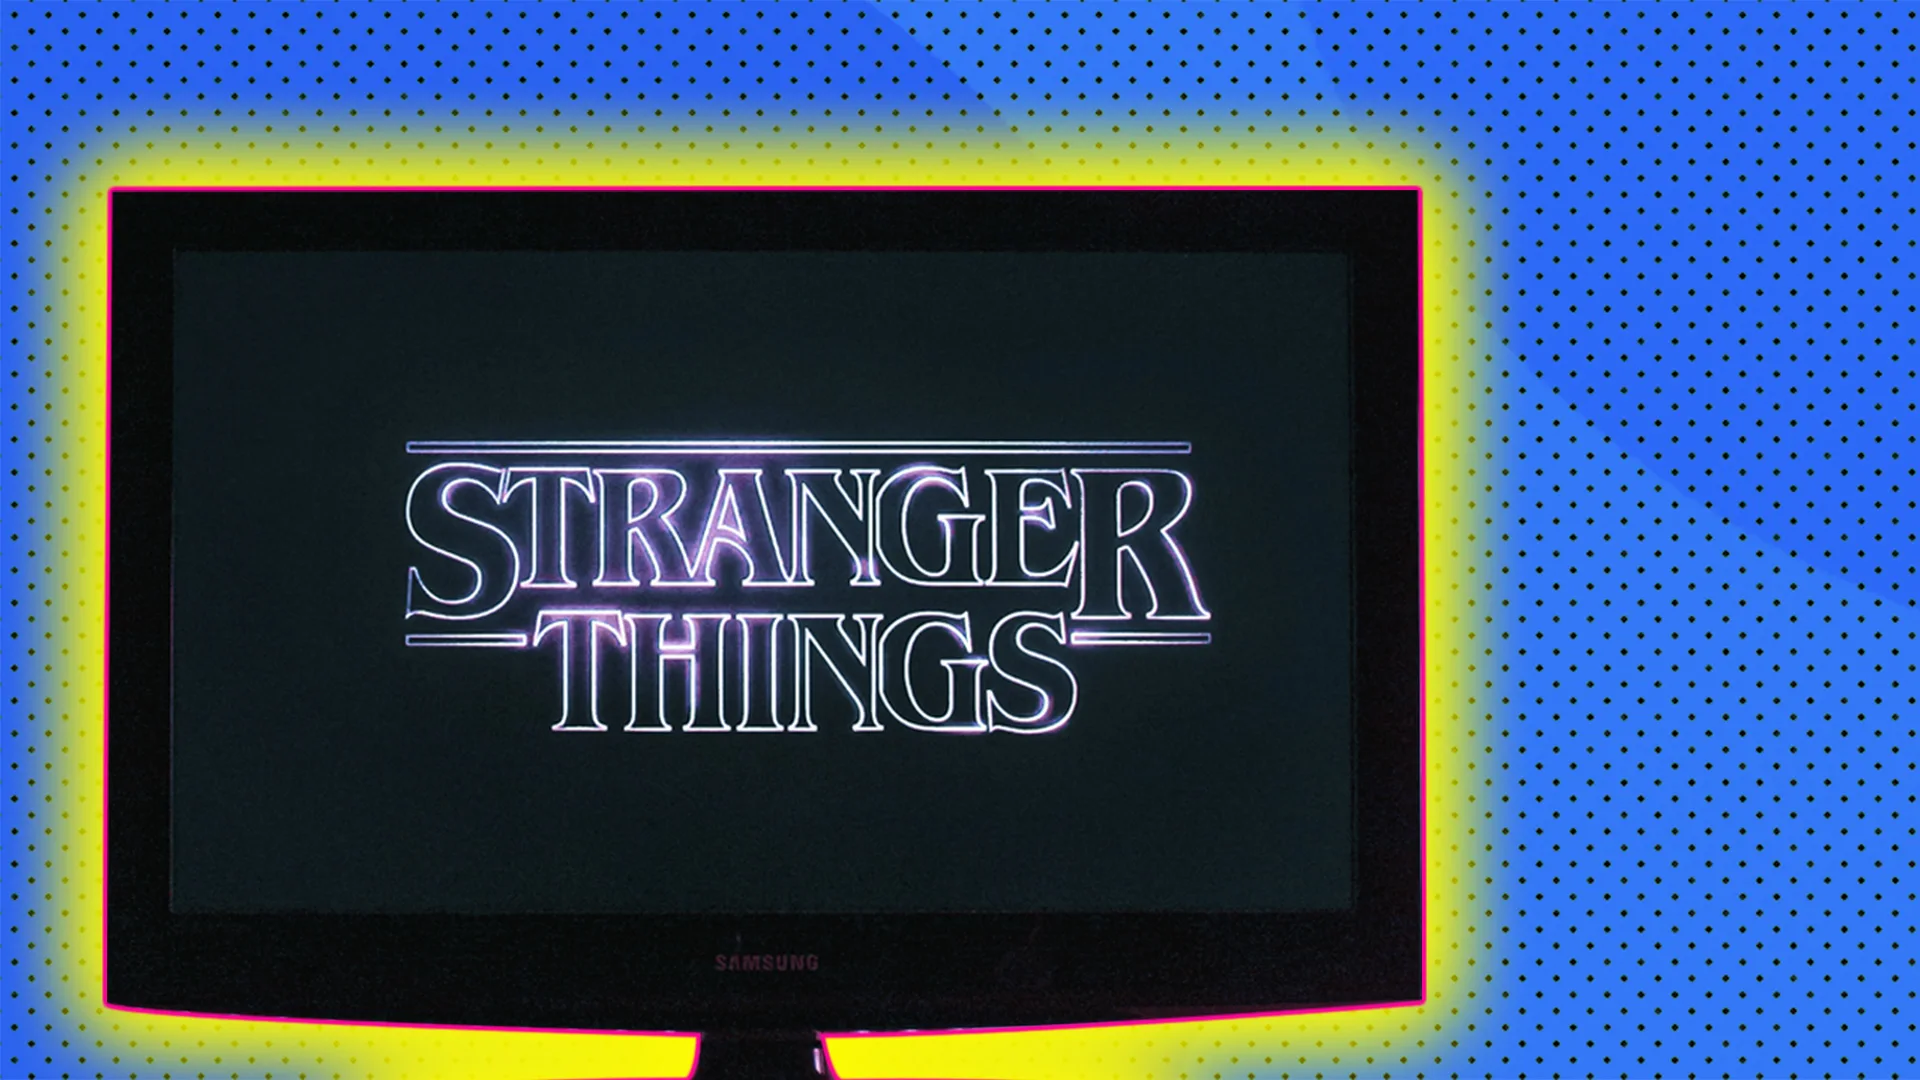 Stranger Things logo on a TV with a polkadot background and a glow around the image